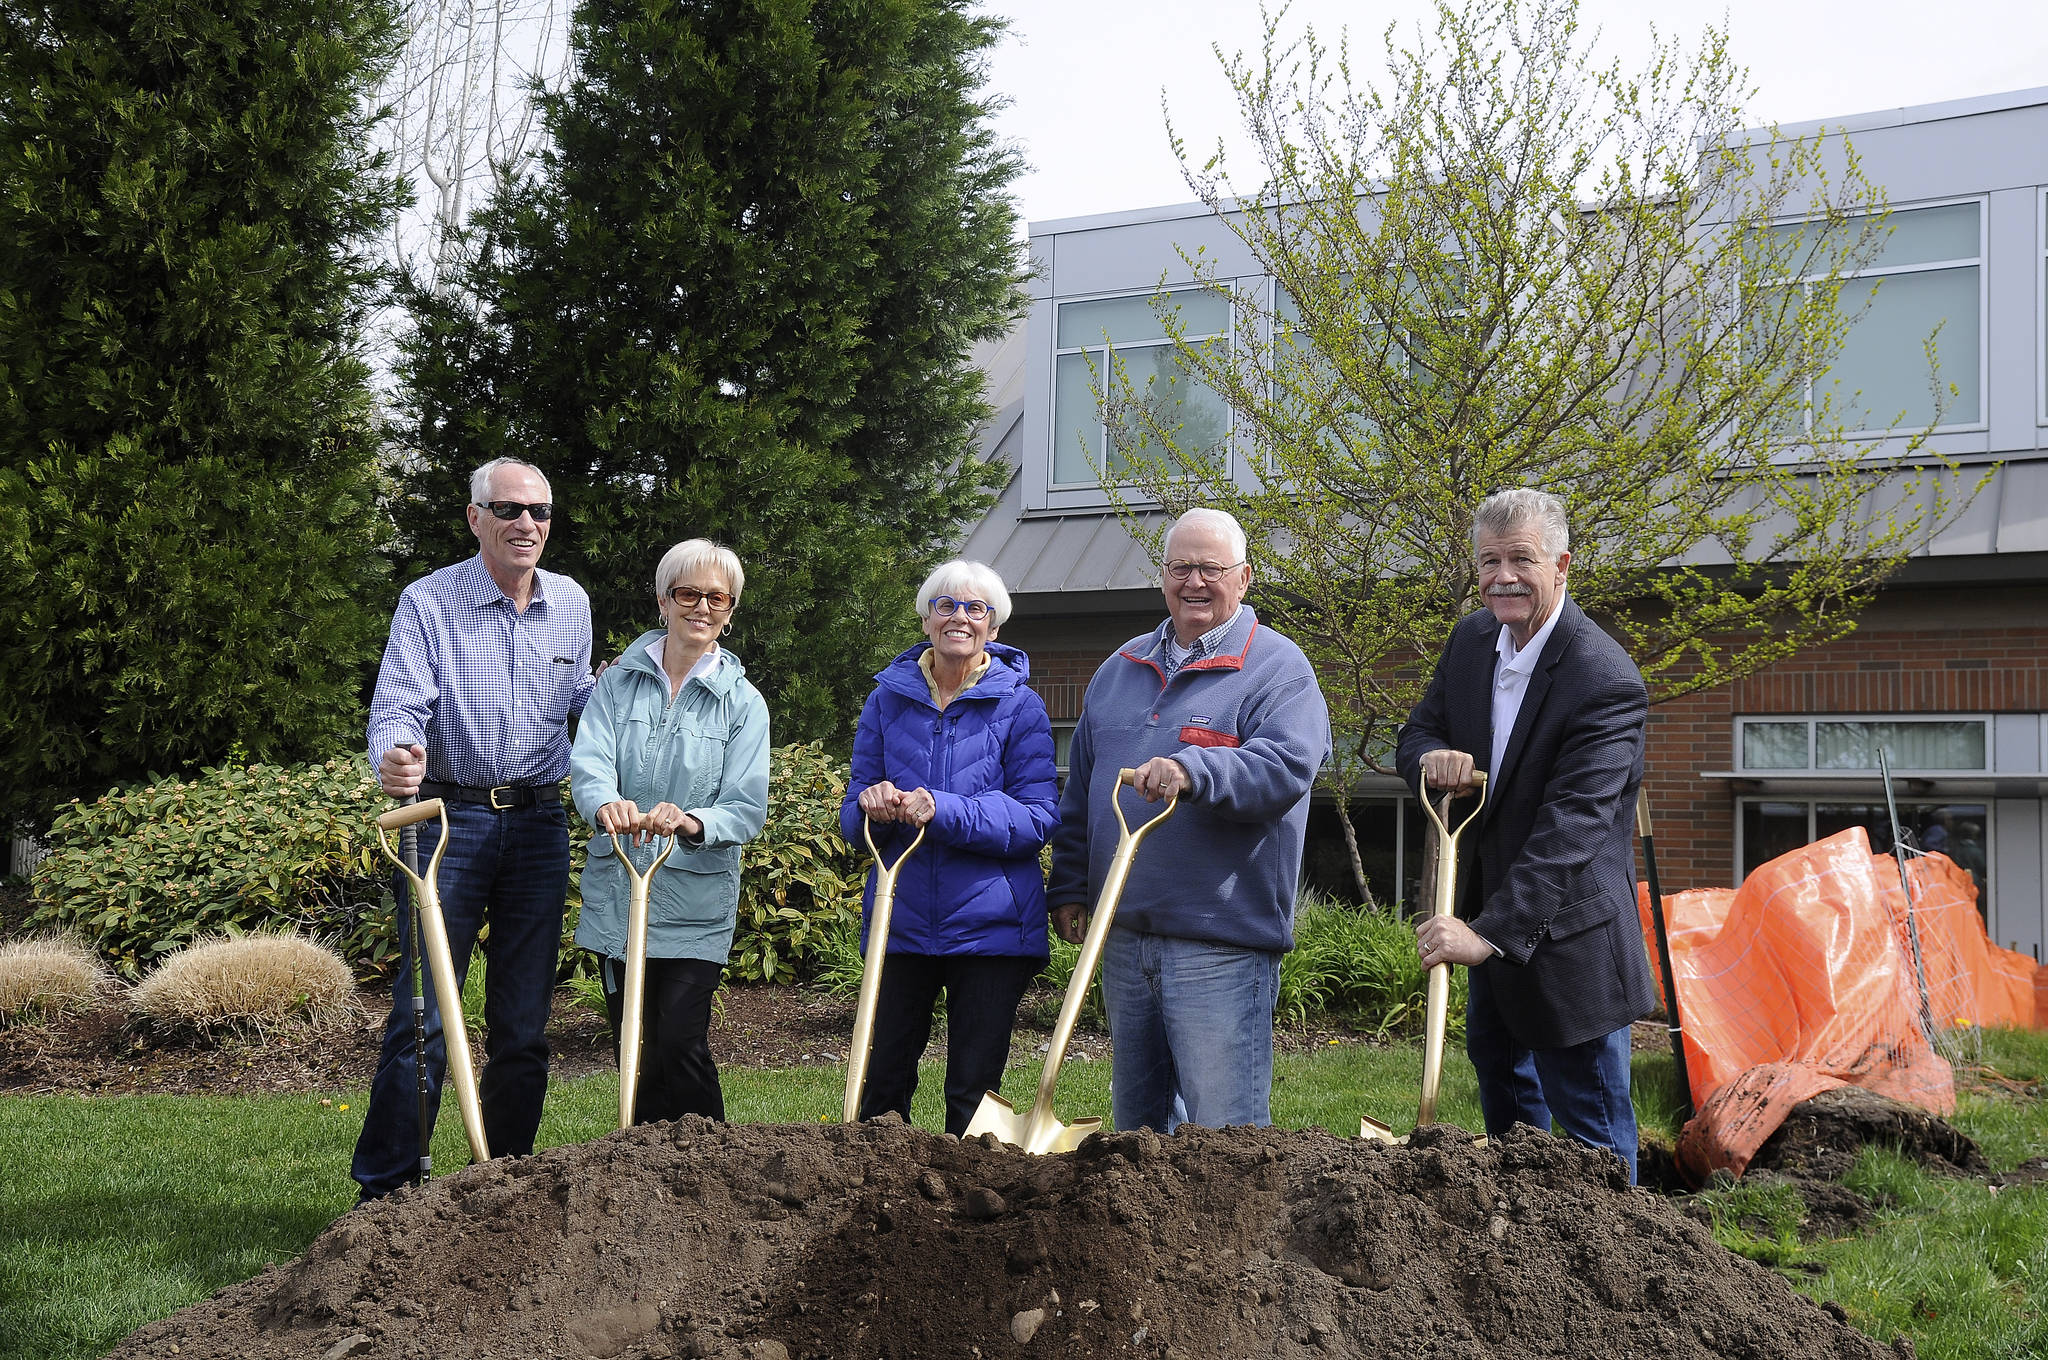 Major donors to a campaign that raised $1.2 million of the $4.4 million Olympic Medical Cancer Center expansion include, from left, Bill and Esther Littlejohn, Barbara and George Brown, and First Federal, represented here by Larry Hueth, President and Chief Executive Officer. (Michael Dashiell/Olympic Peninsula News Group)